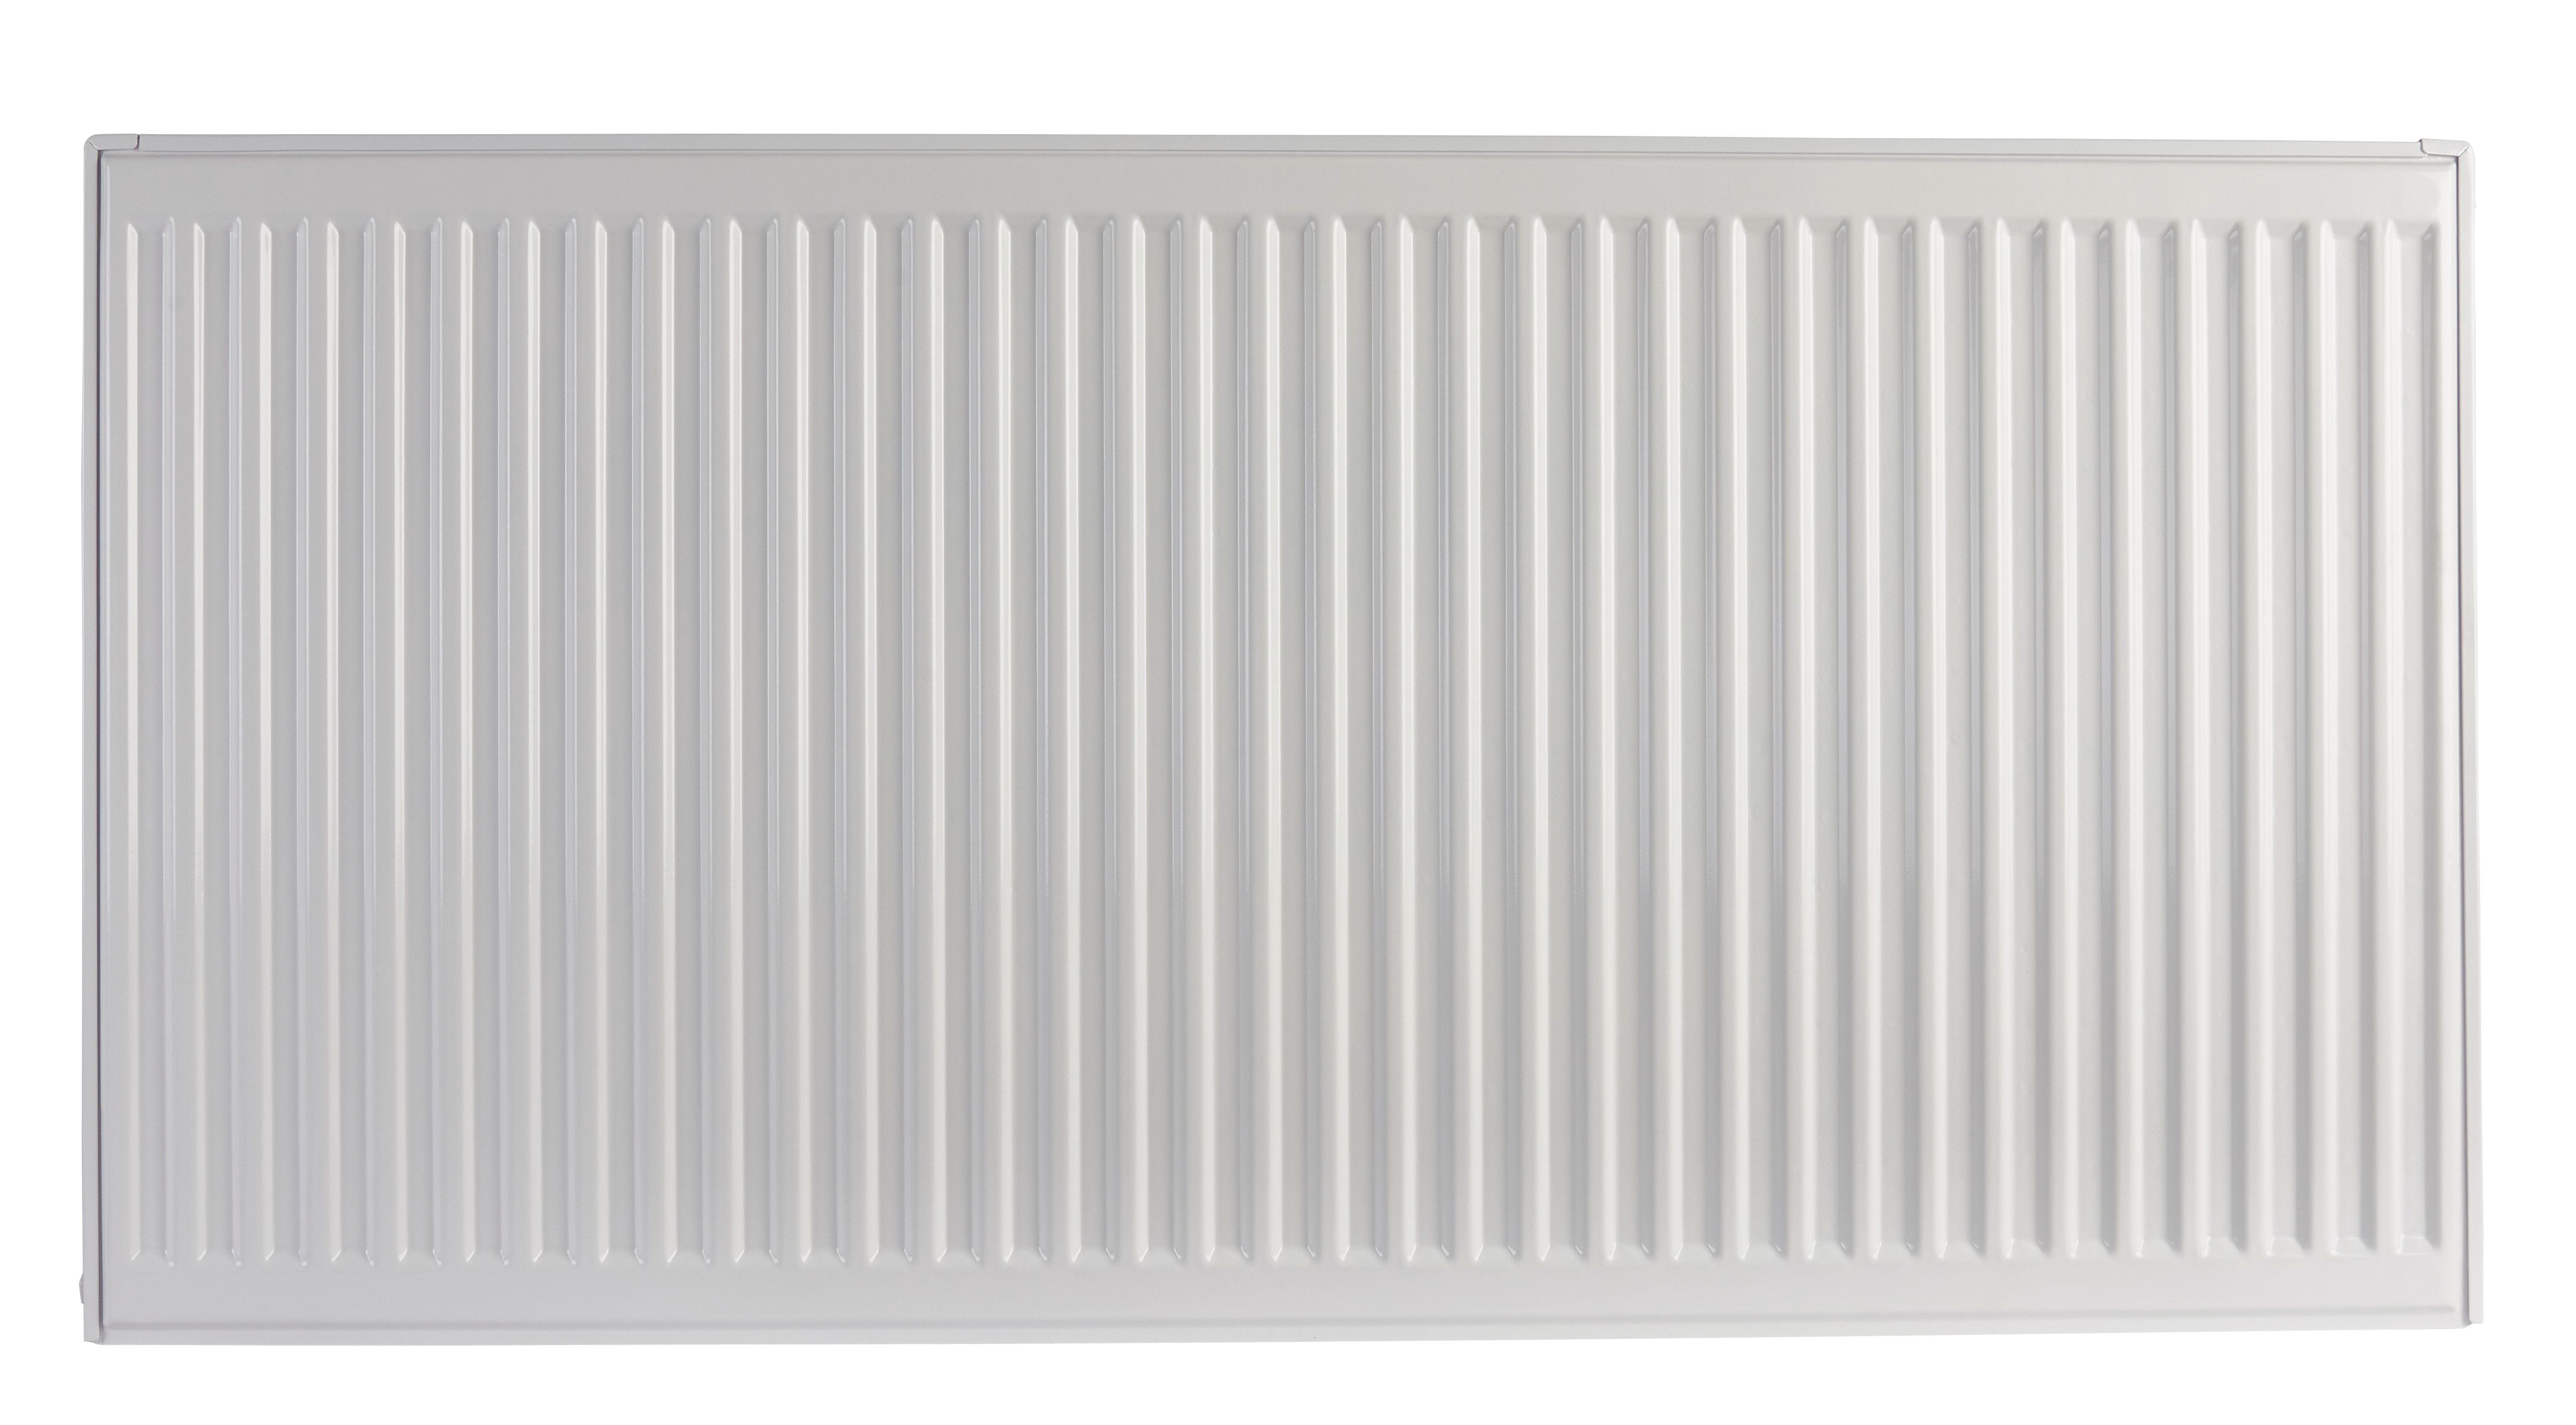 Image of Homeline by Stelrad 600 x 800mm Type 11 Single Panel Single Convector Radiator